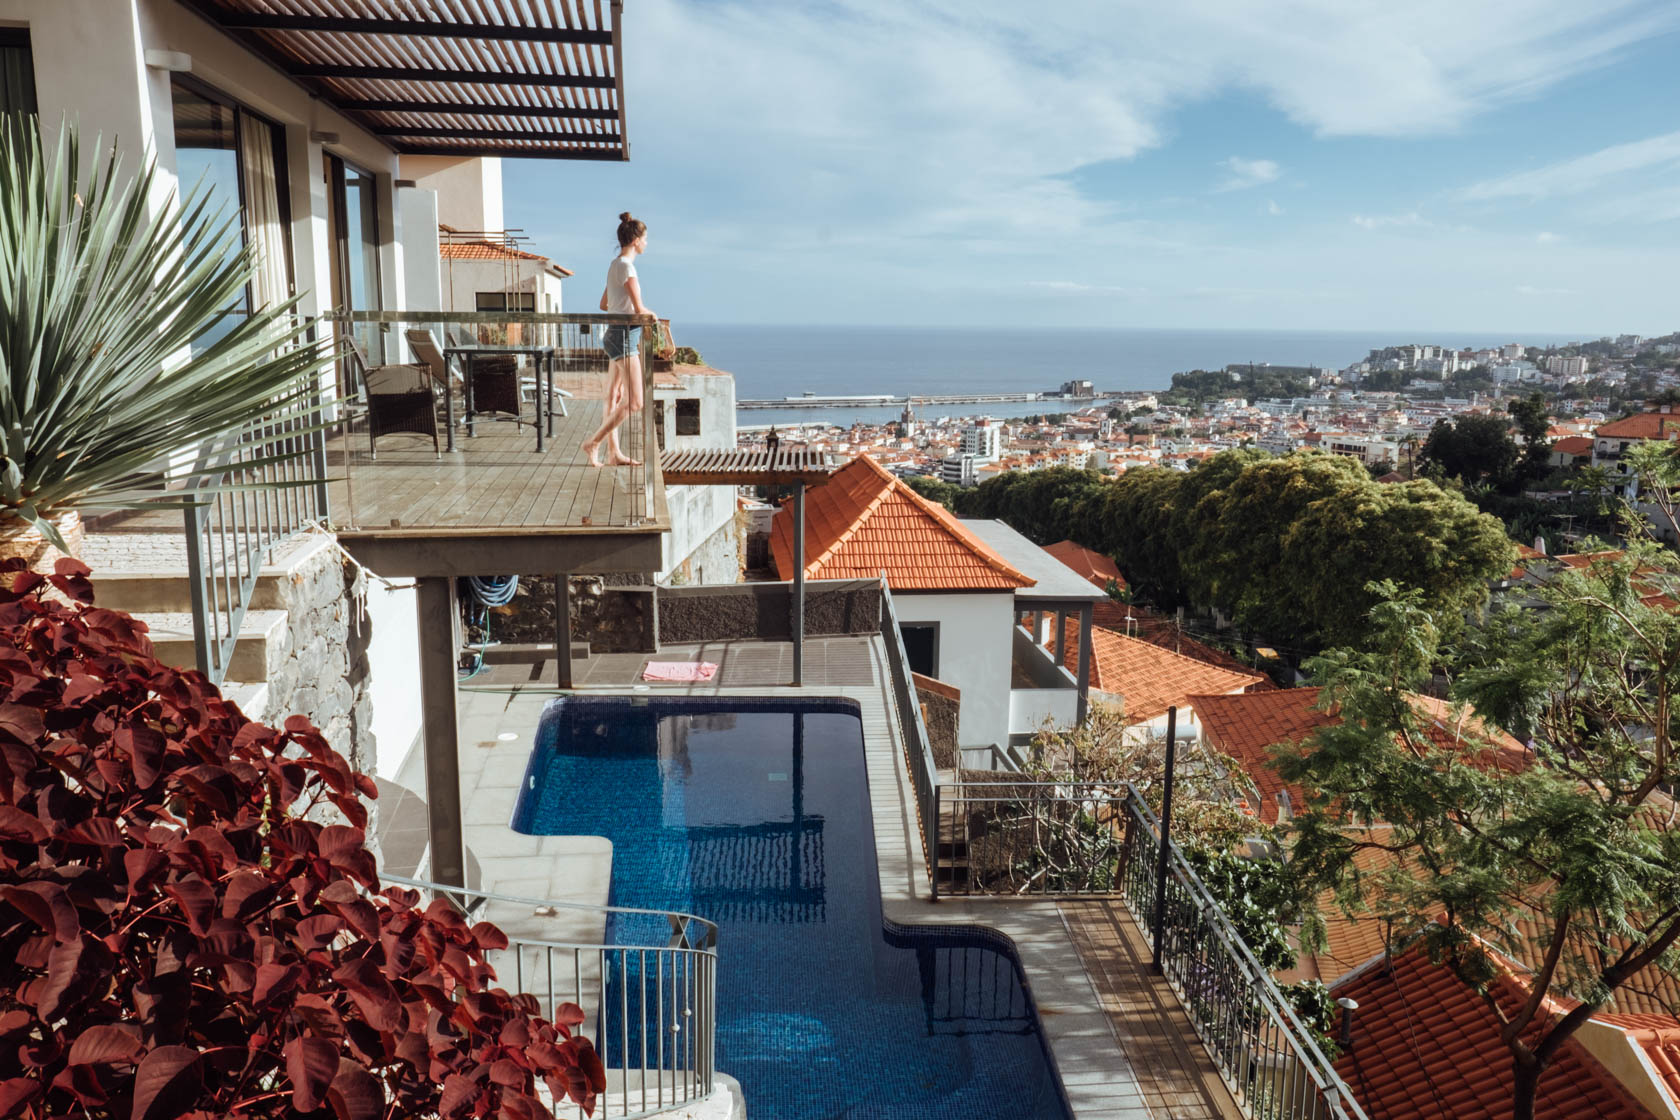 Where to stay in Funchal